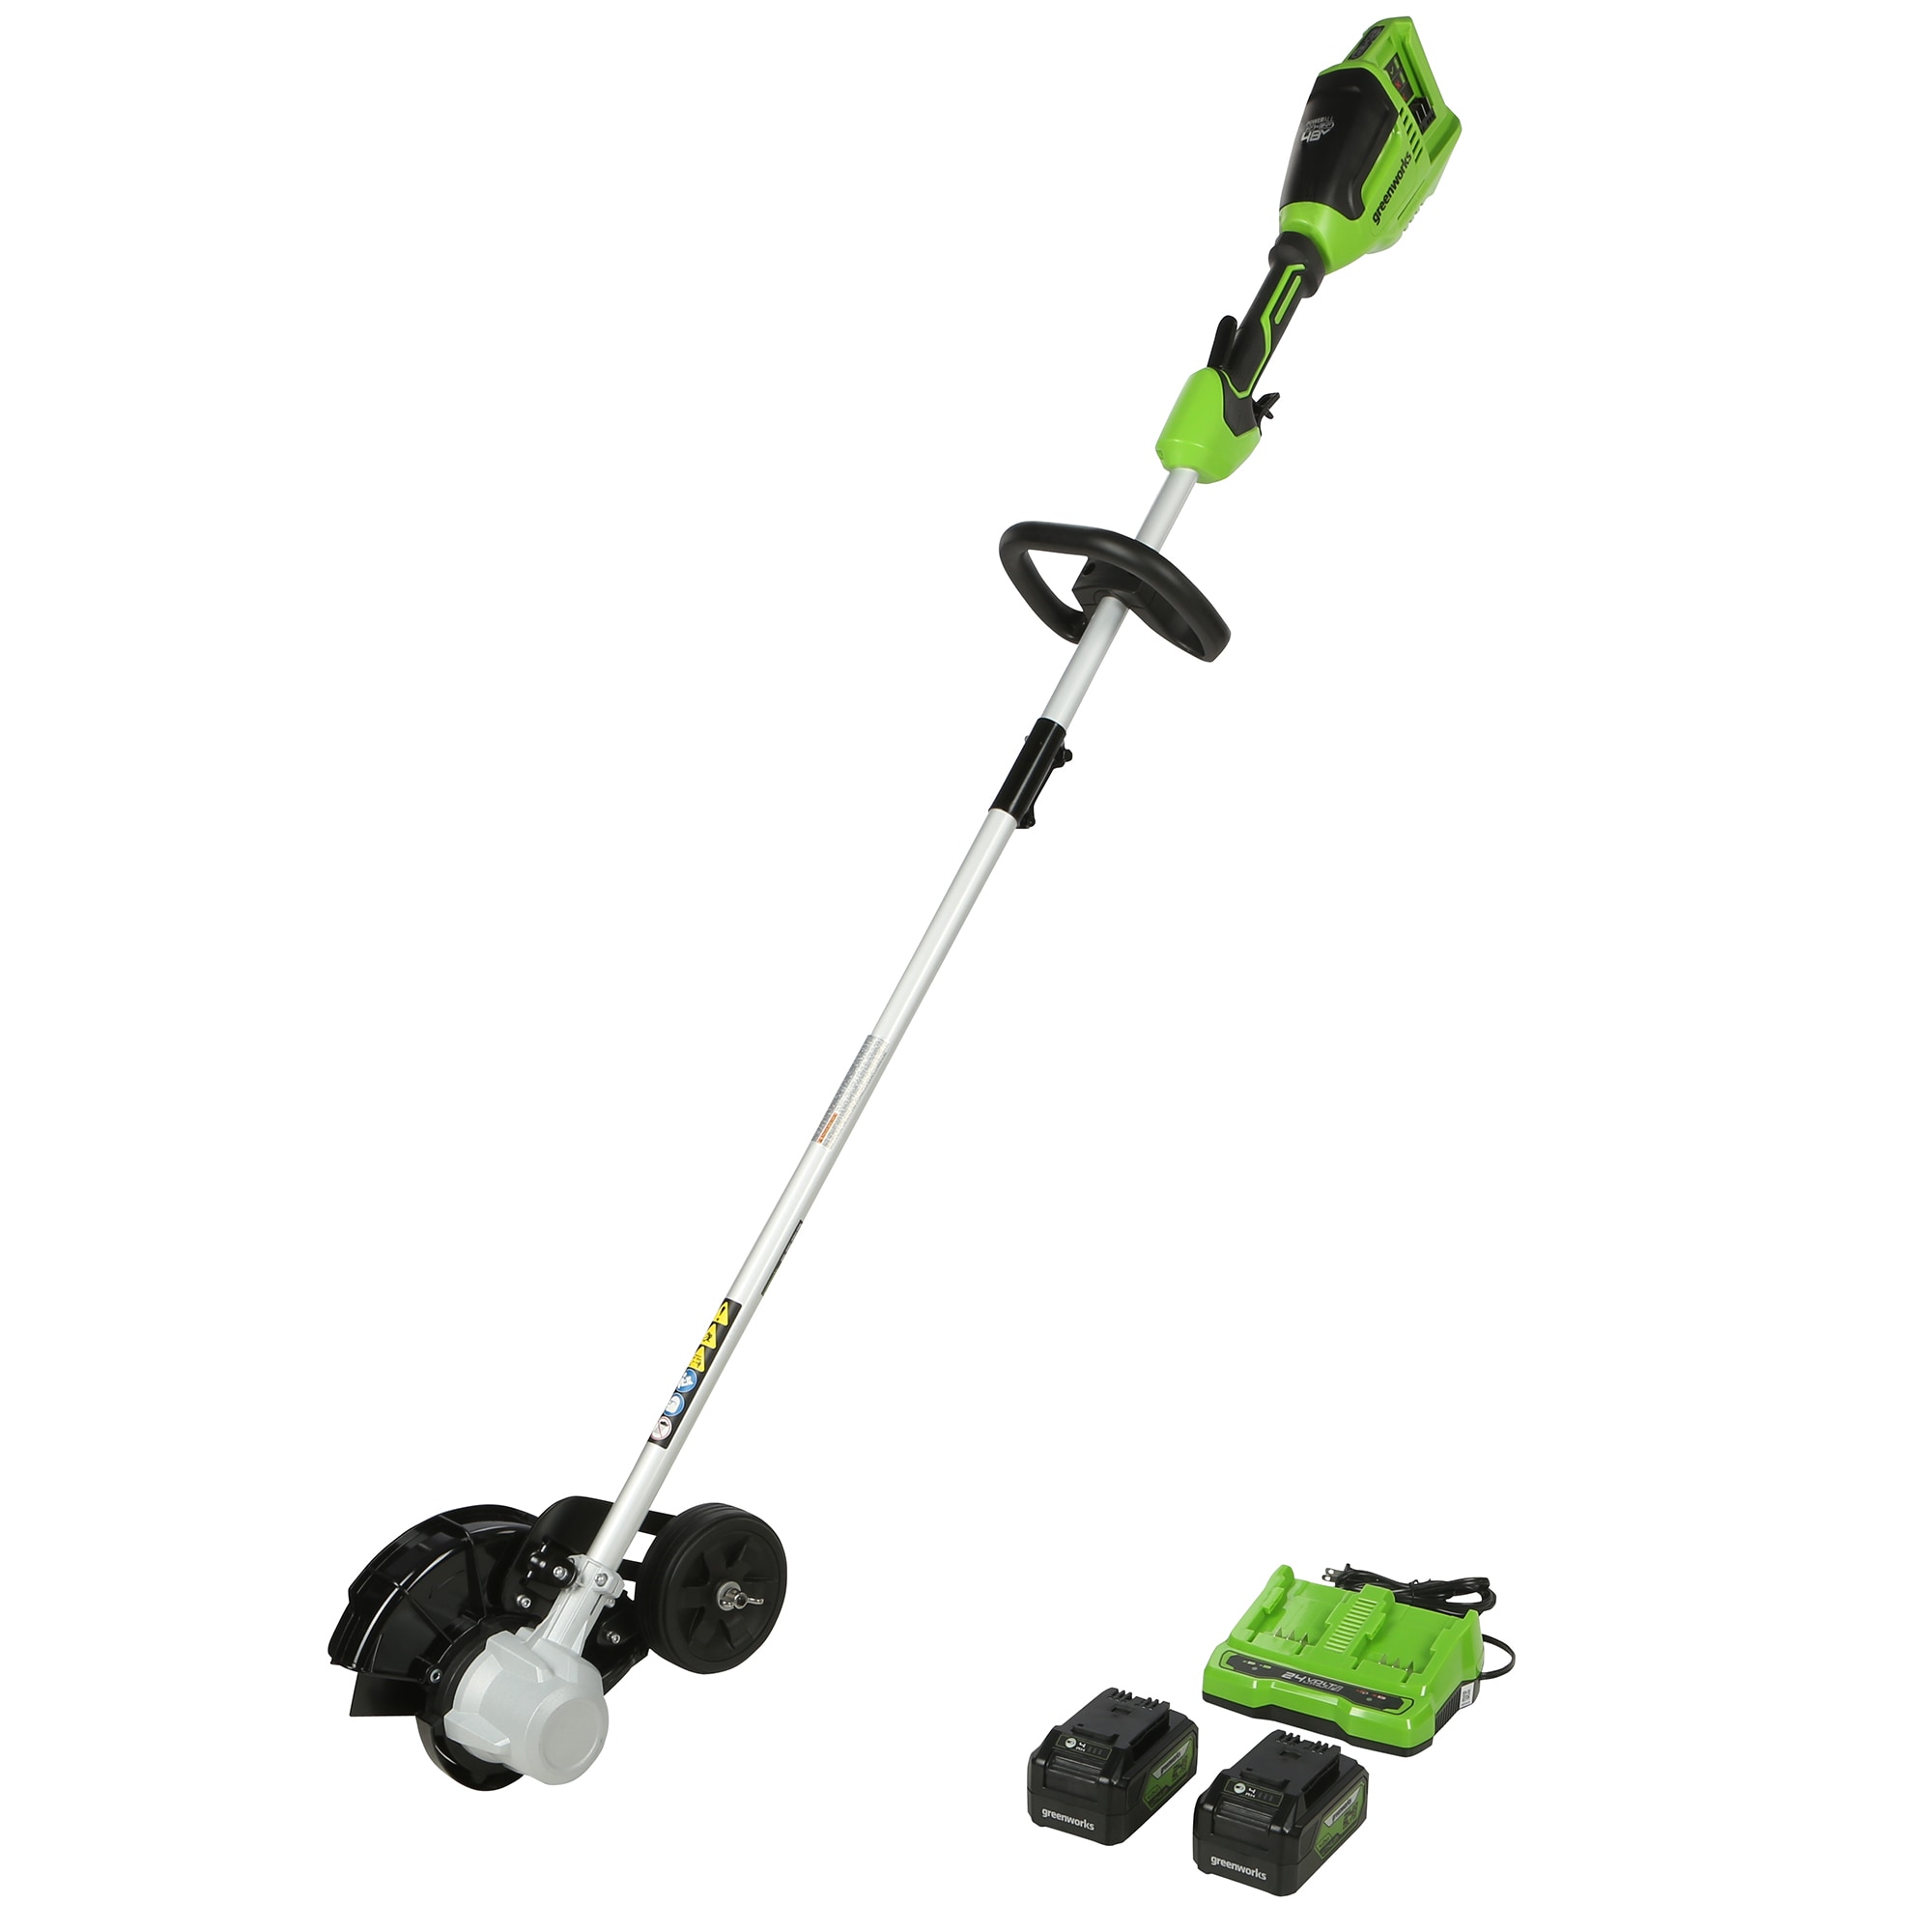 BLACK+DECKER 2-in-1 String Trimmer / Edger and Trencher, 12 -Amp